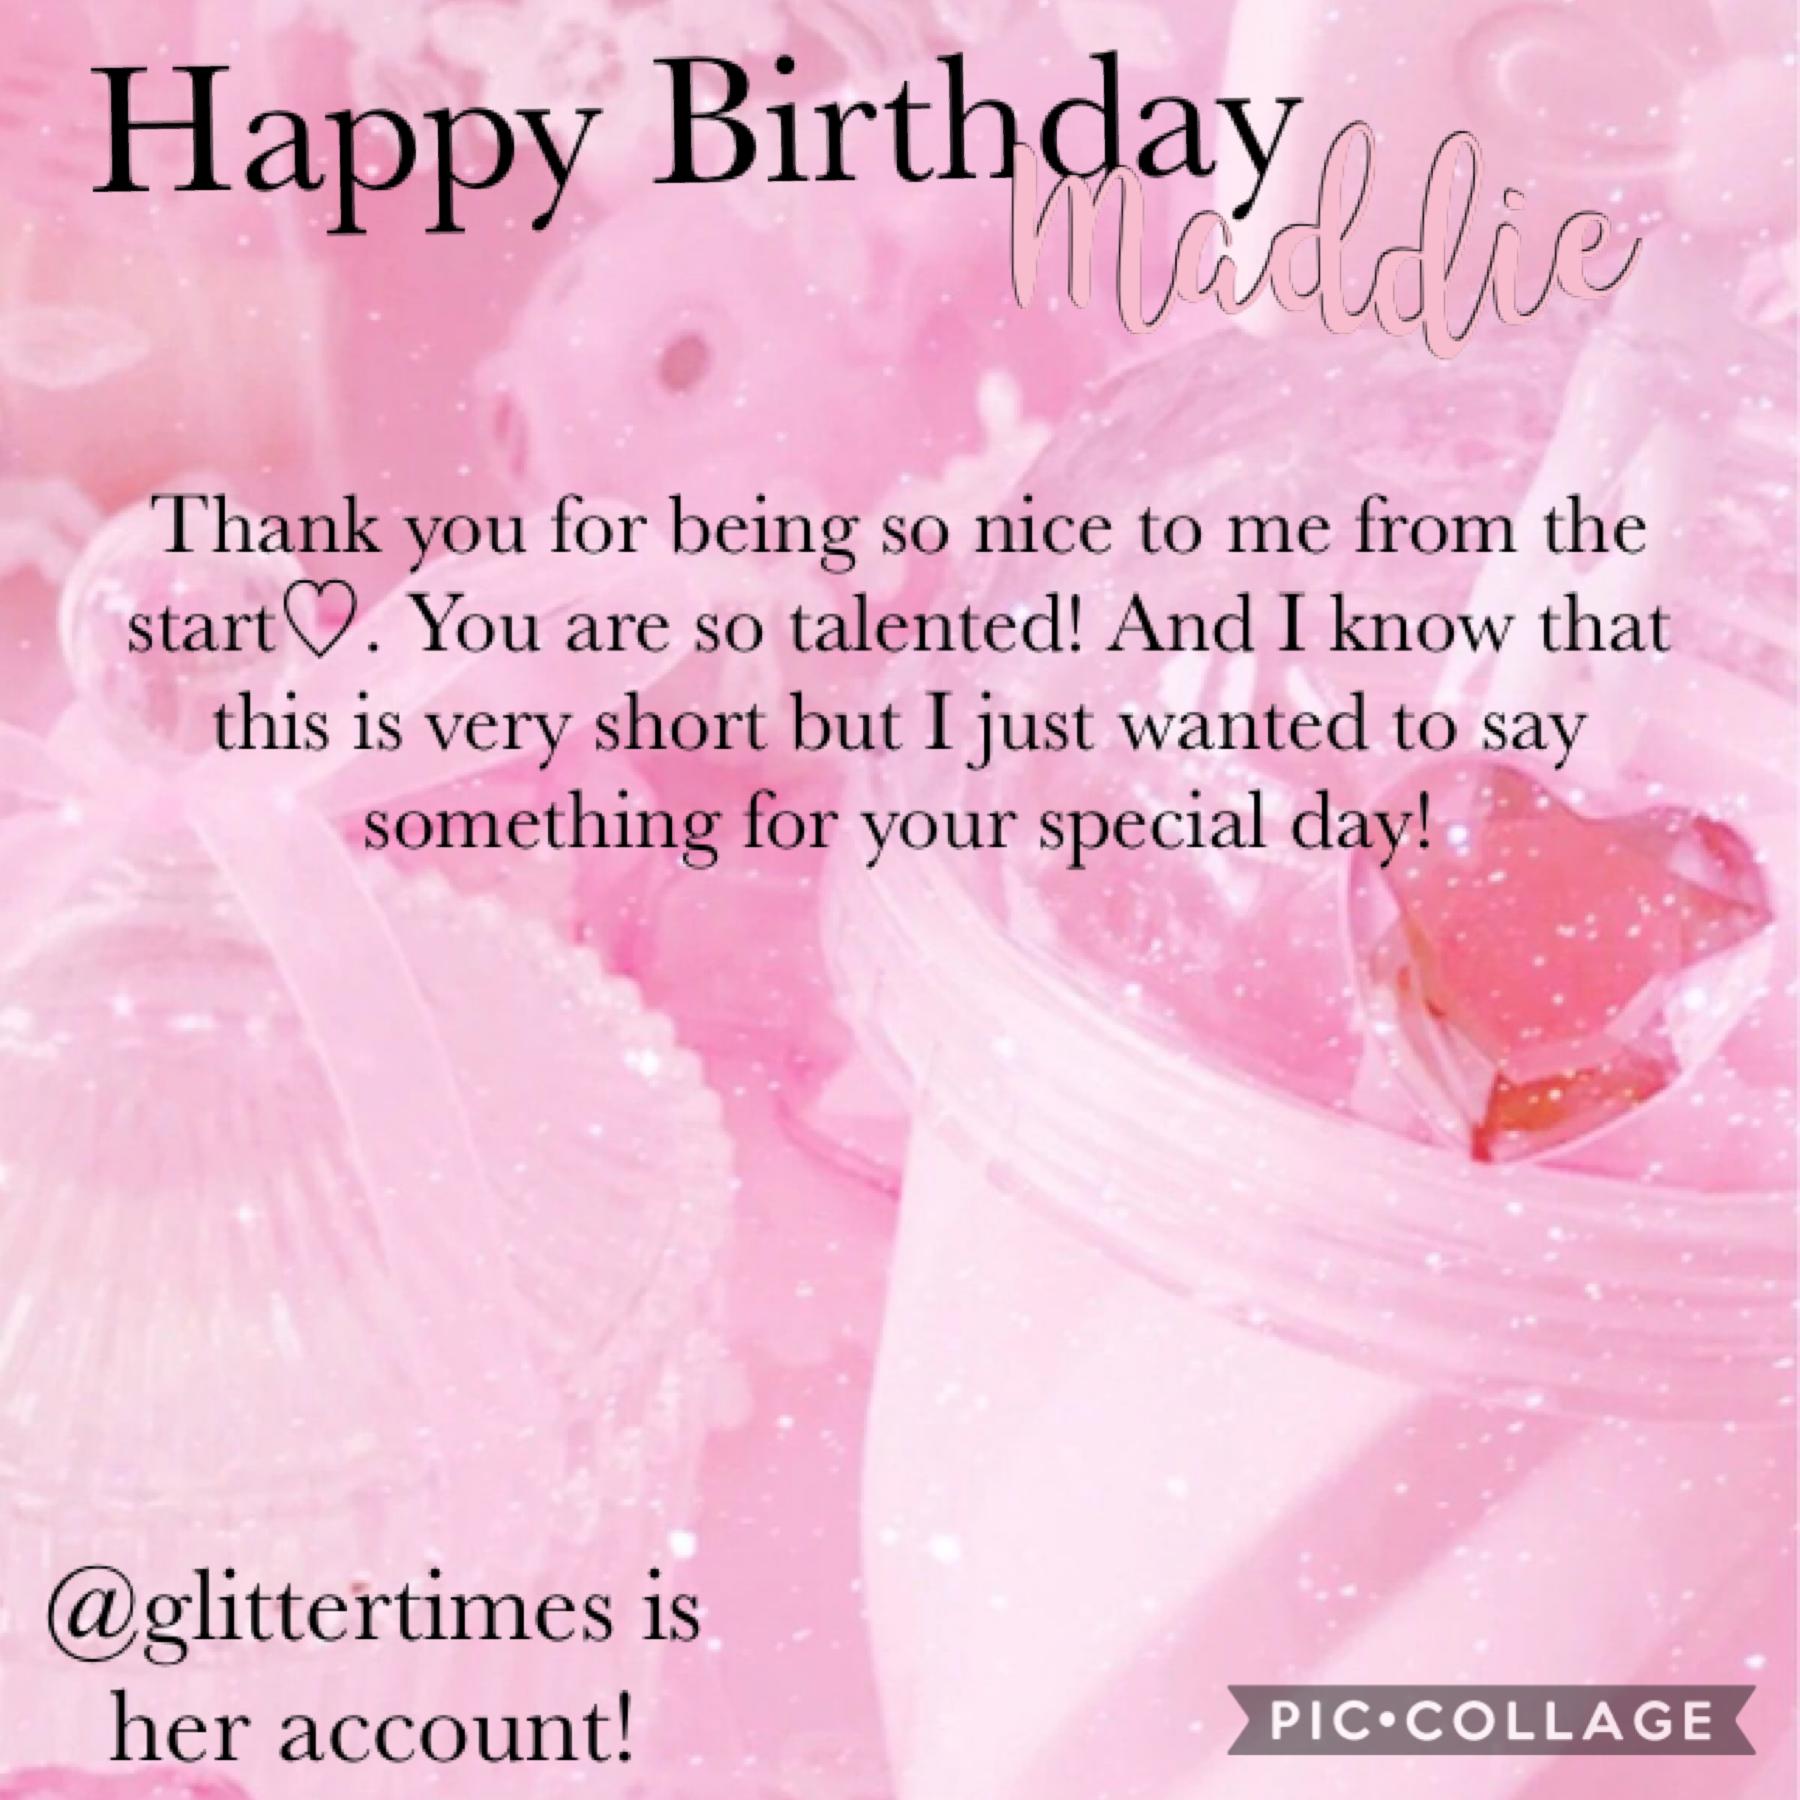 Happy Birthday! tap
Go follow her! @glittertimes!!
Also please go follow @HelpOurEarth! That account is well needed!
5/19/2020𓅿